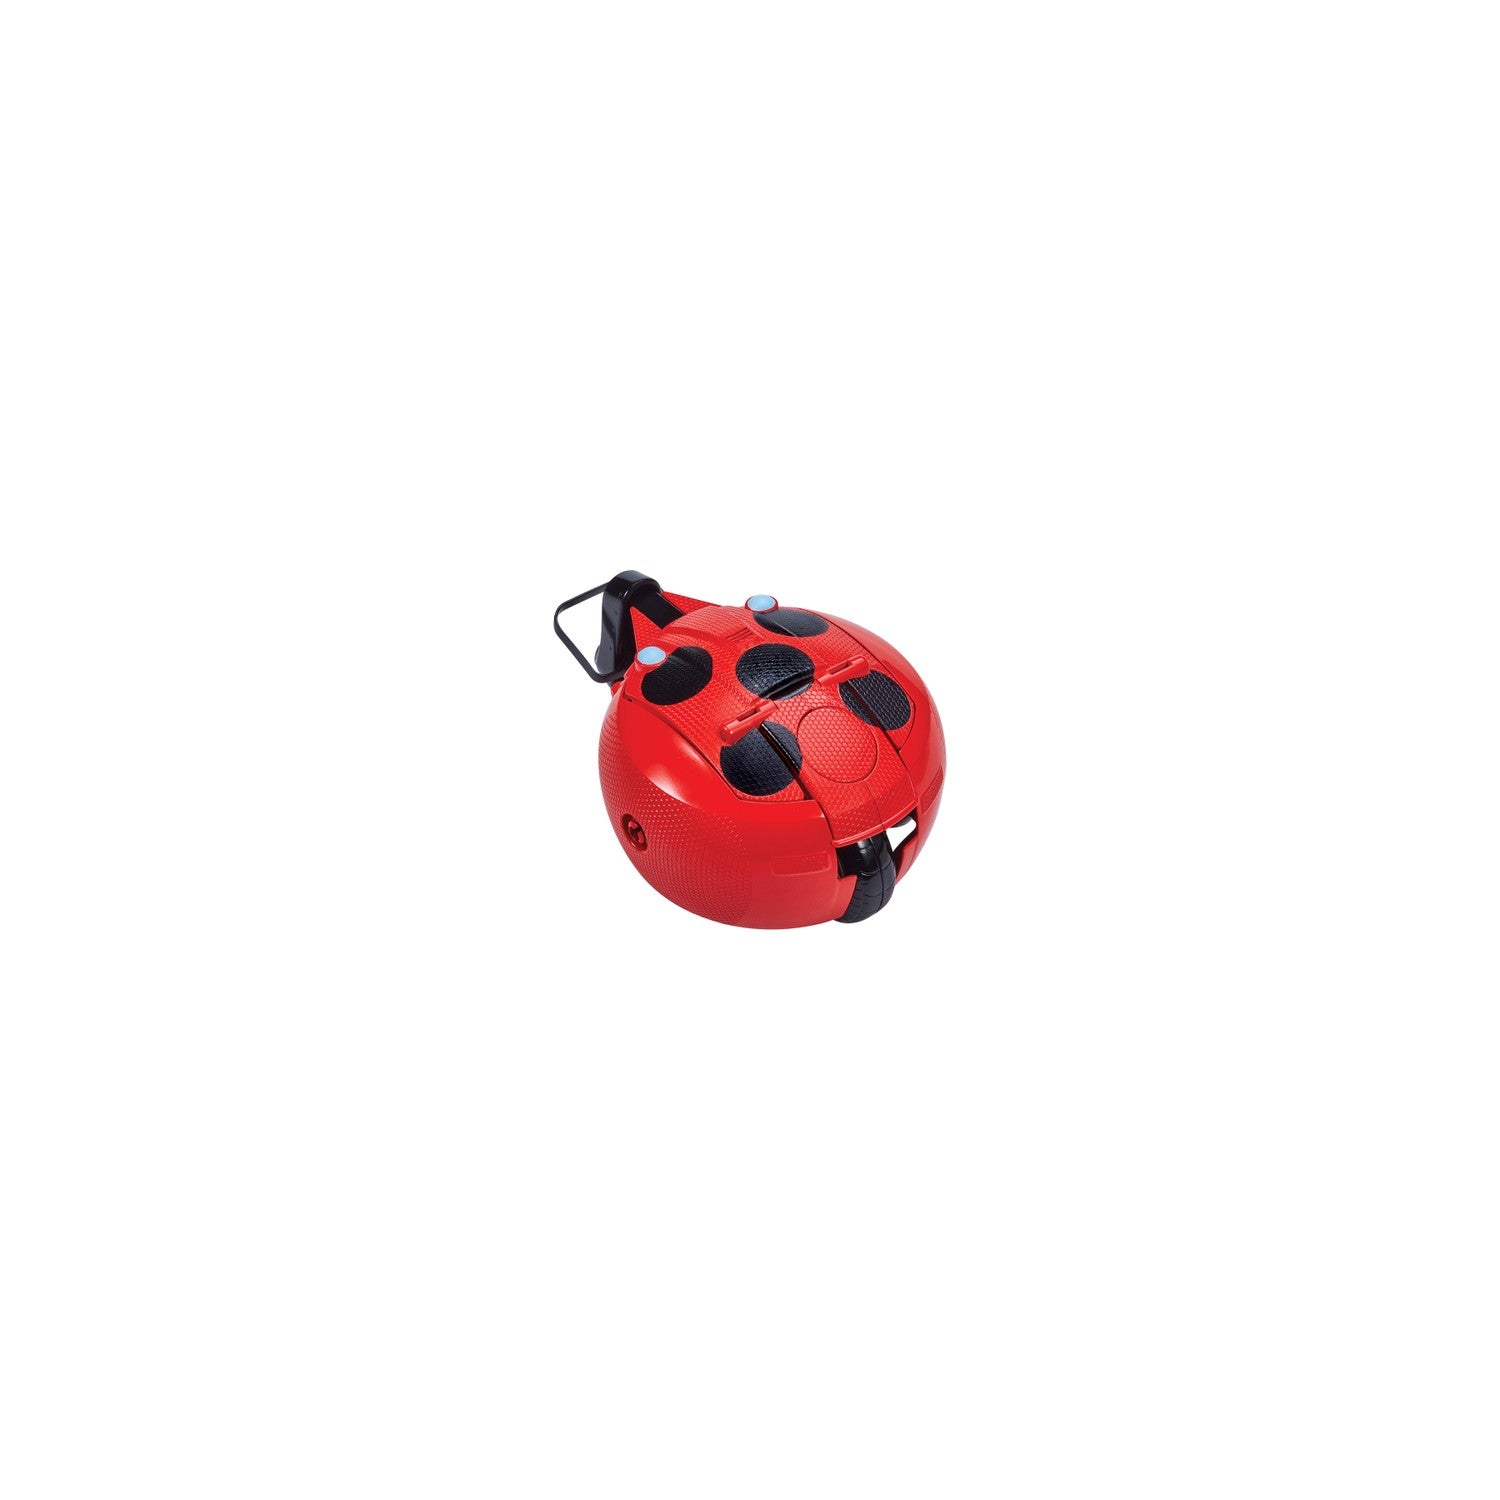 Miraculous Switch 'n Go Scooter with Ladybug Doll